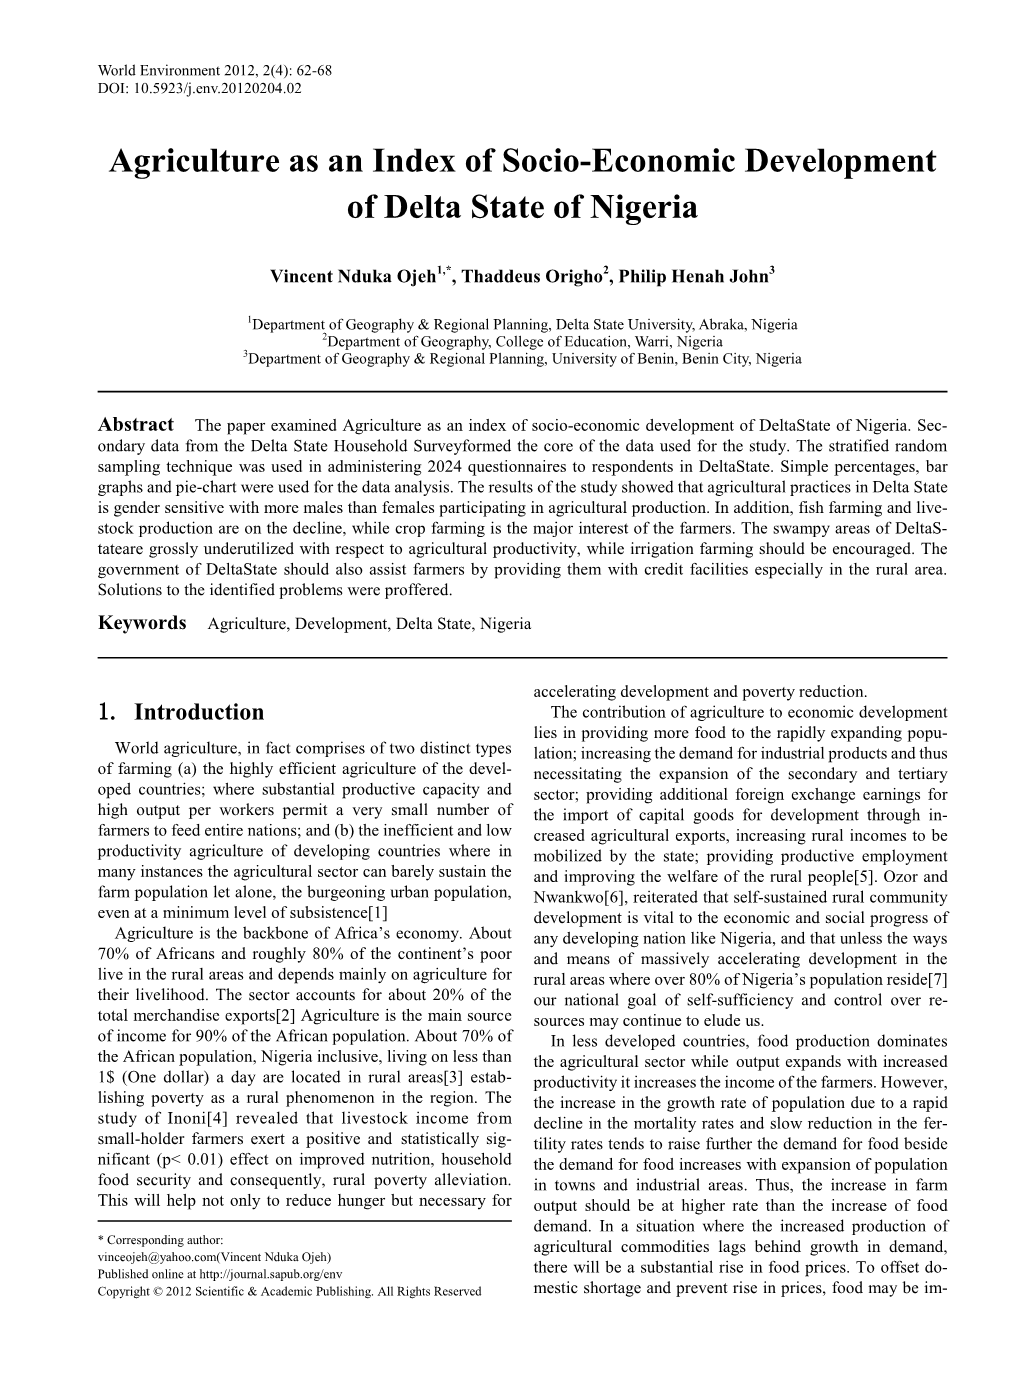 Agriculture As an Index of Socio-Economic Development of Delta State of Nigeria